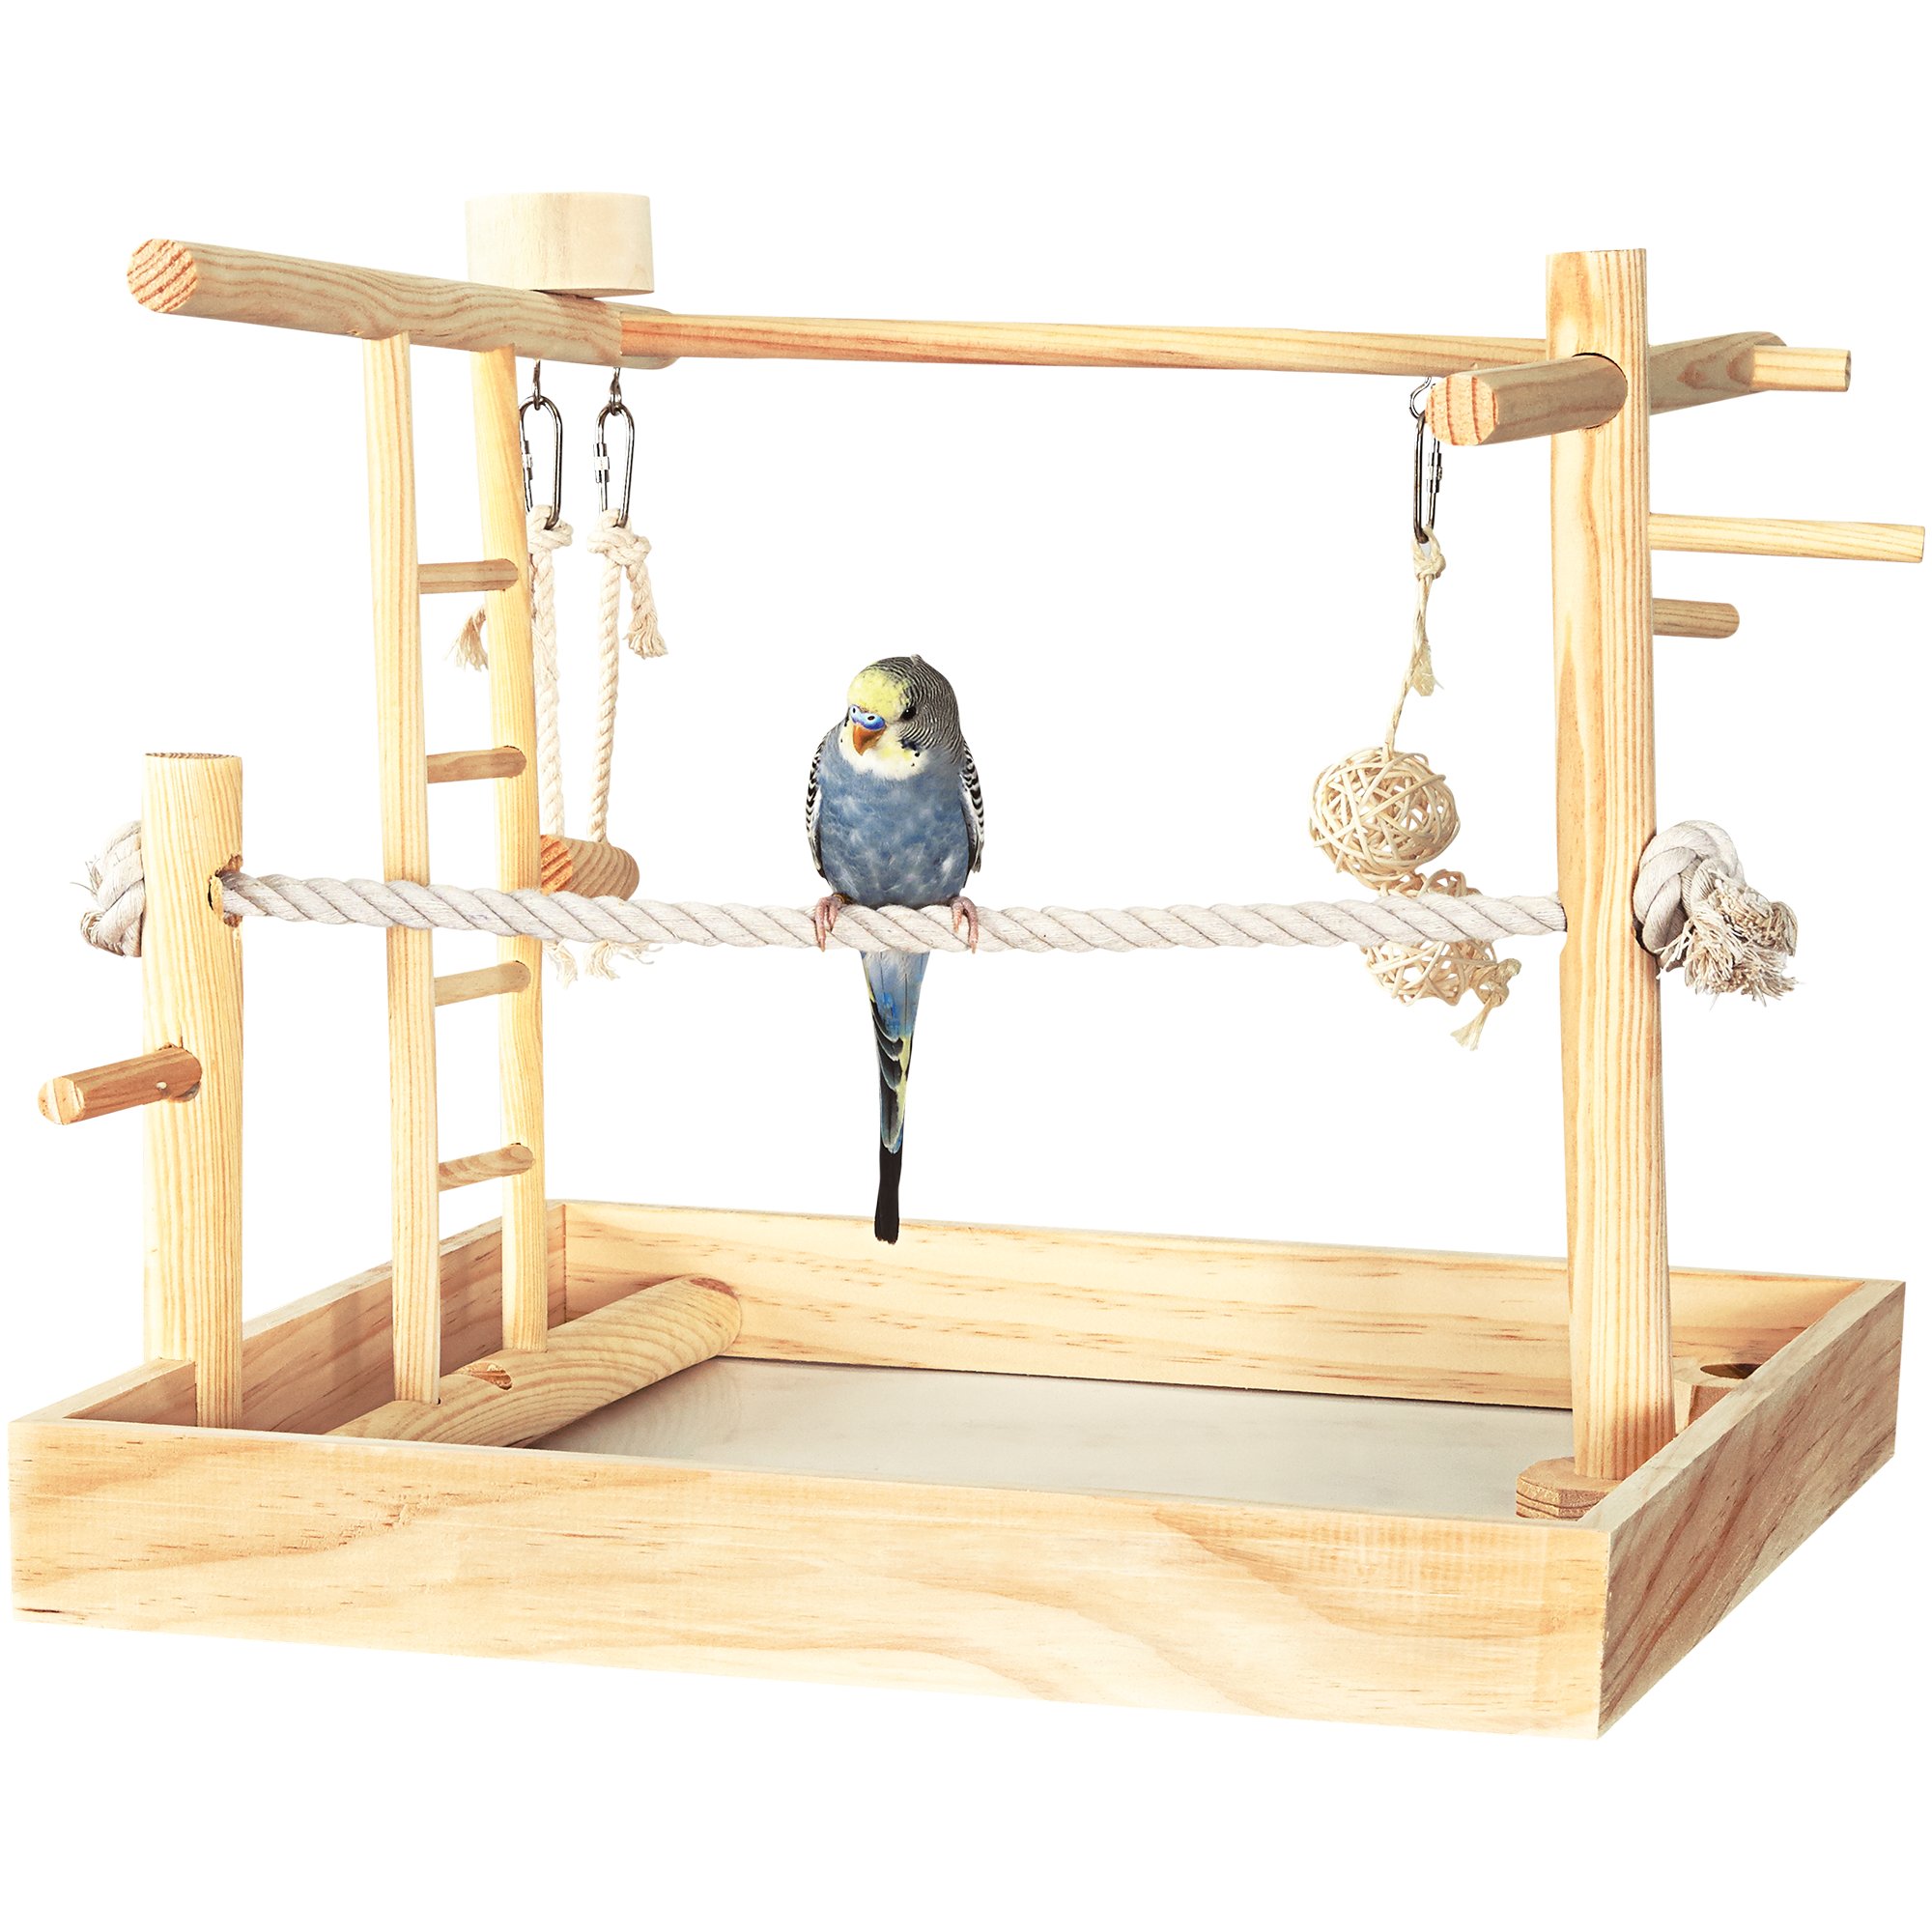 You & Me 3-in-1 Playground for Birds Petco